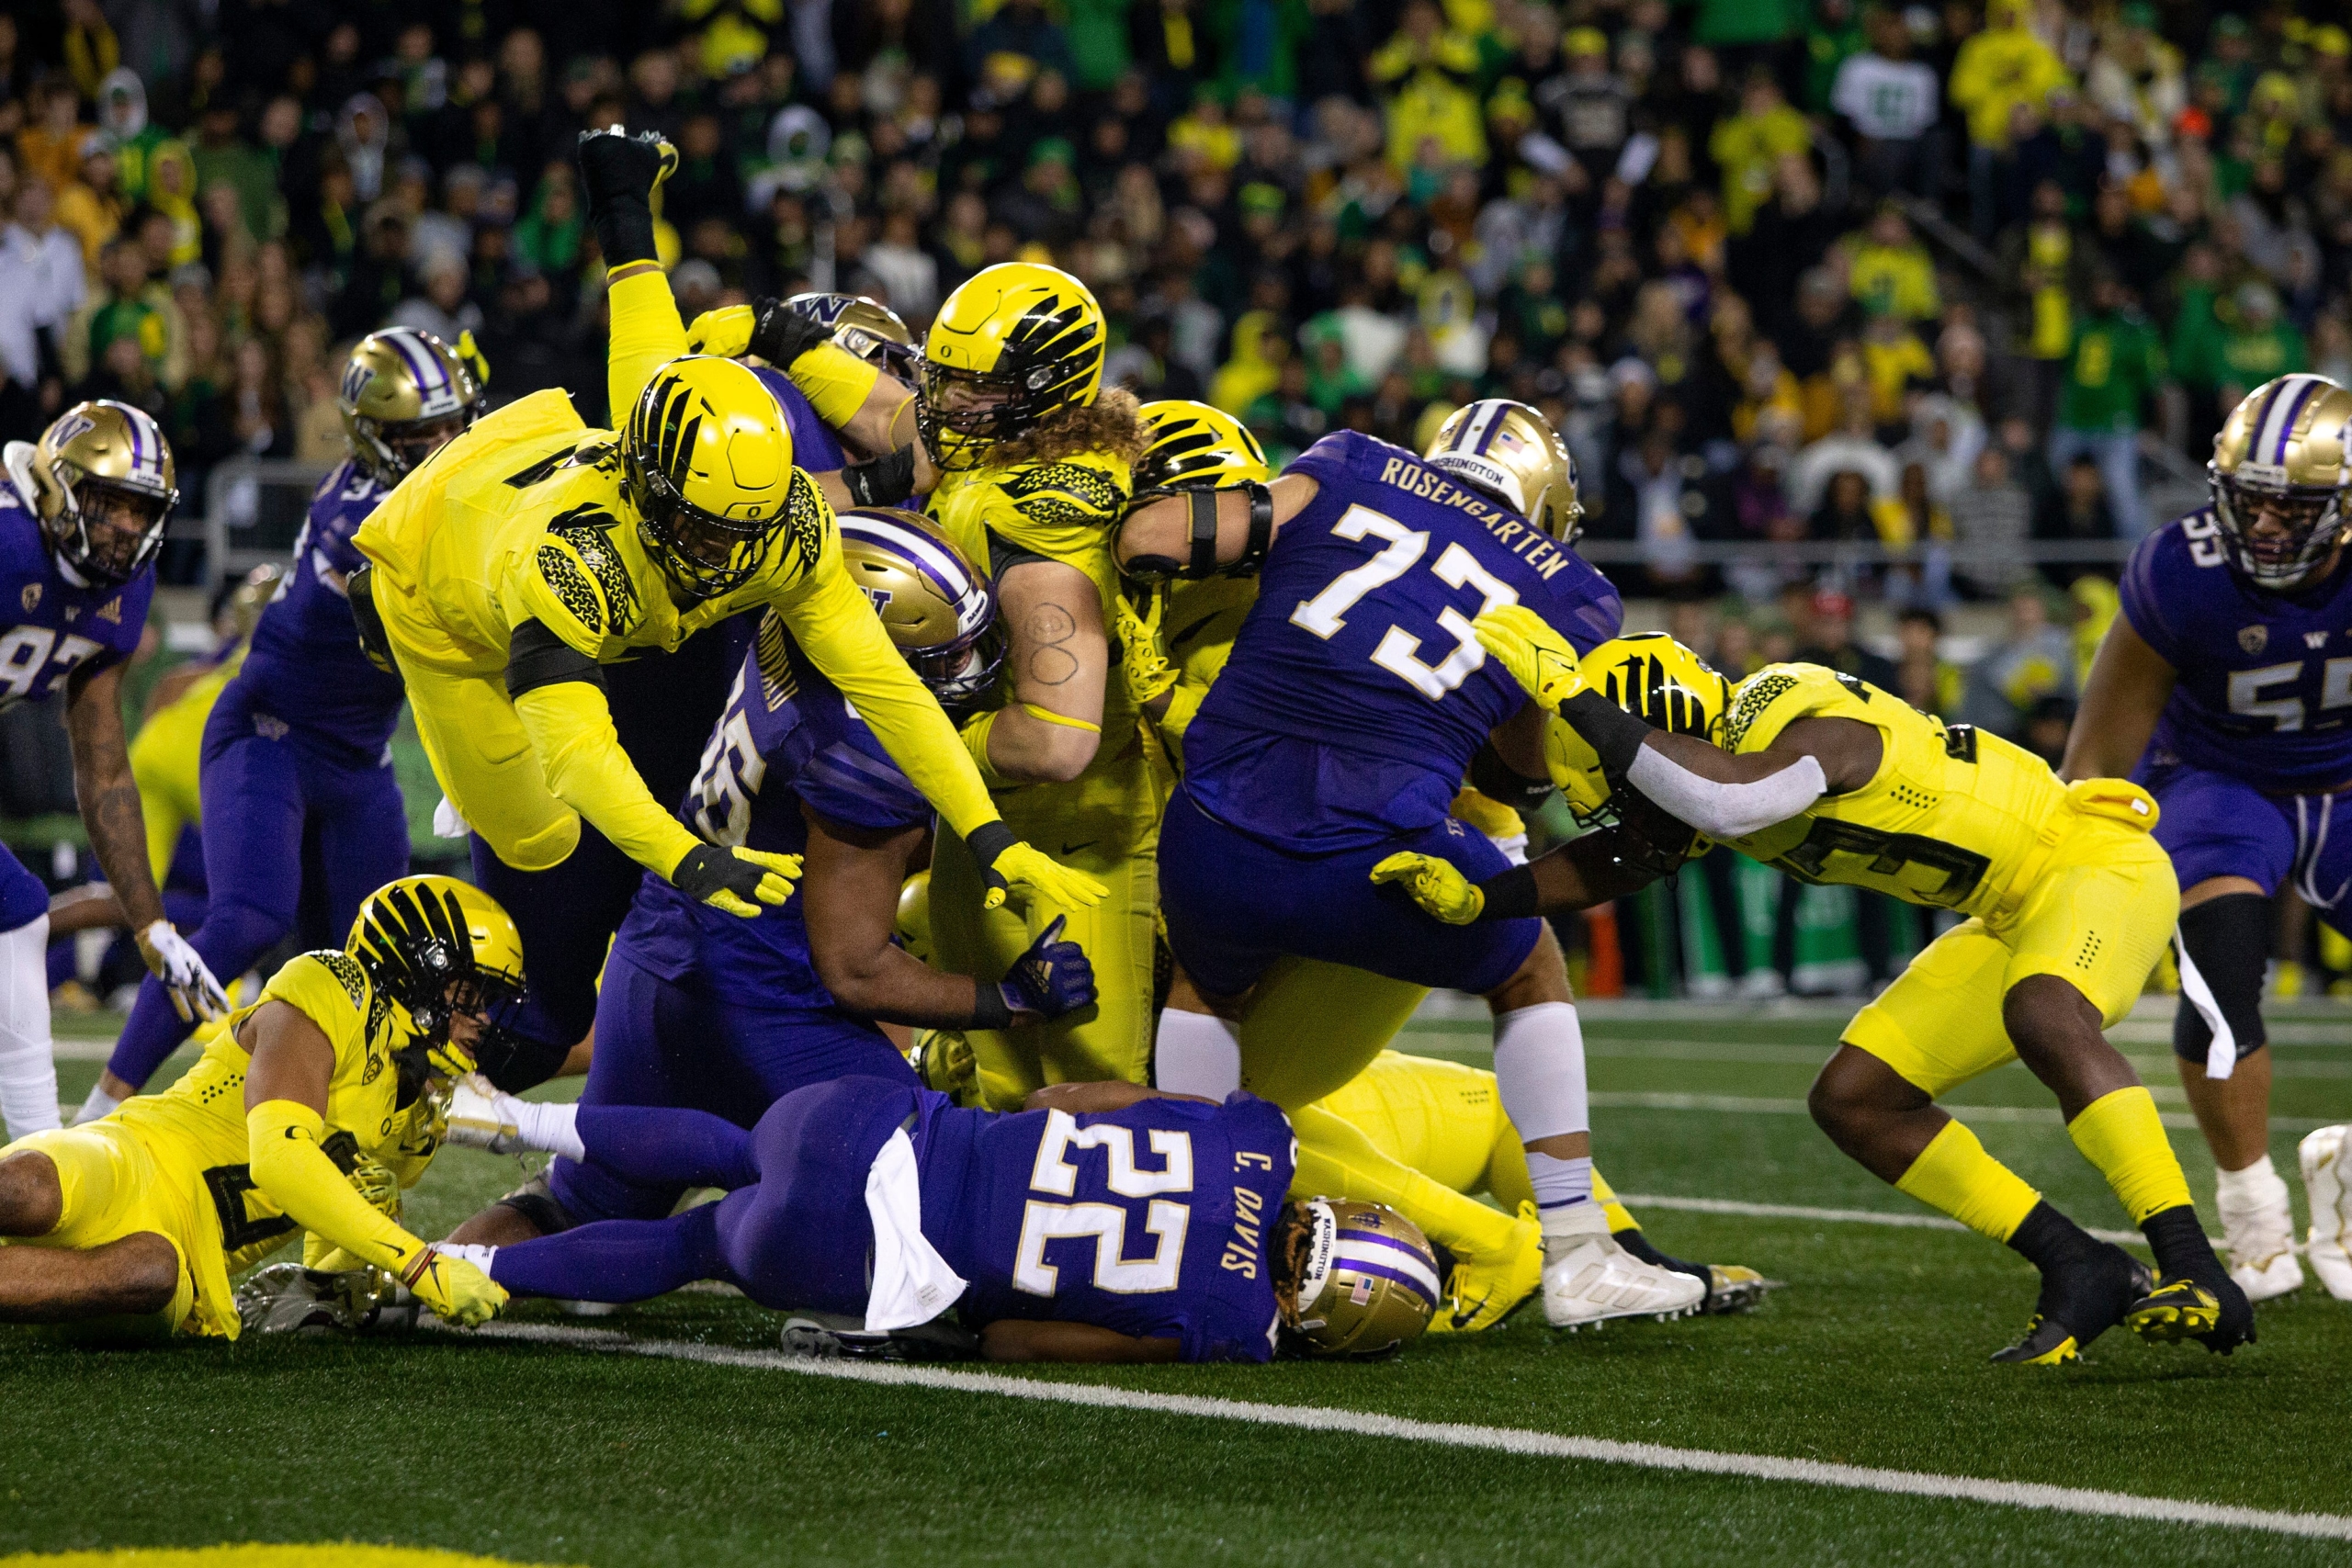 Winners, losers from College Football Week 11: Harold Perkins becomes a star, Oregon Ducks defense implodes